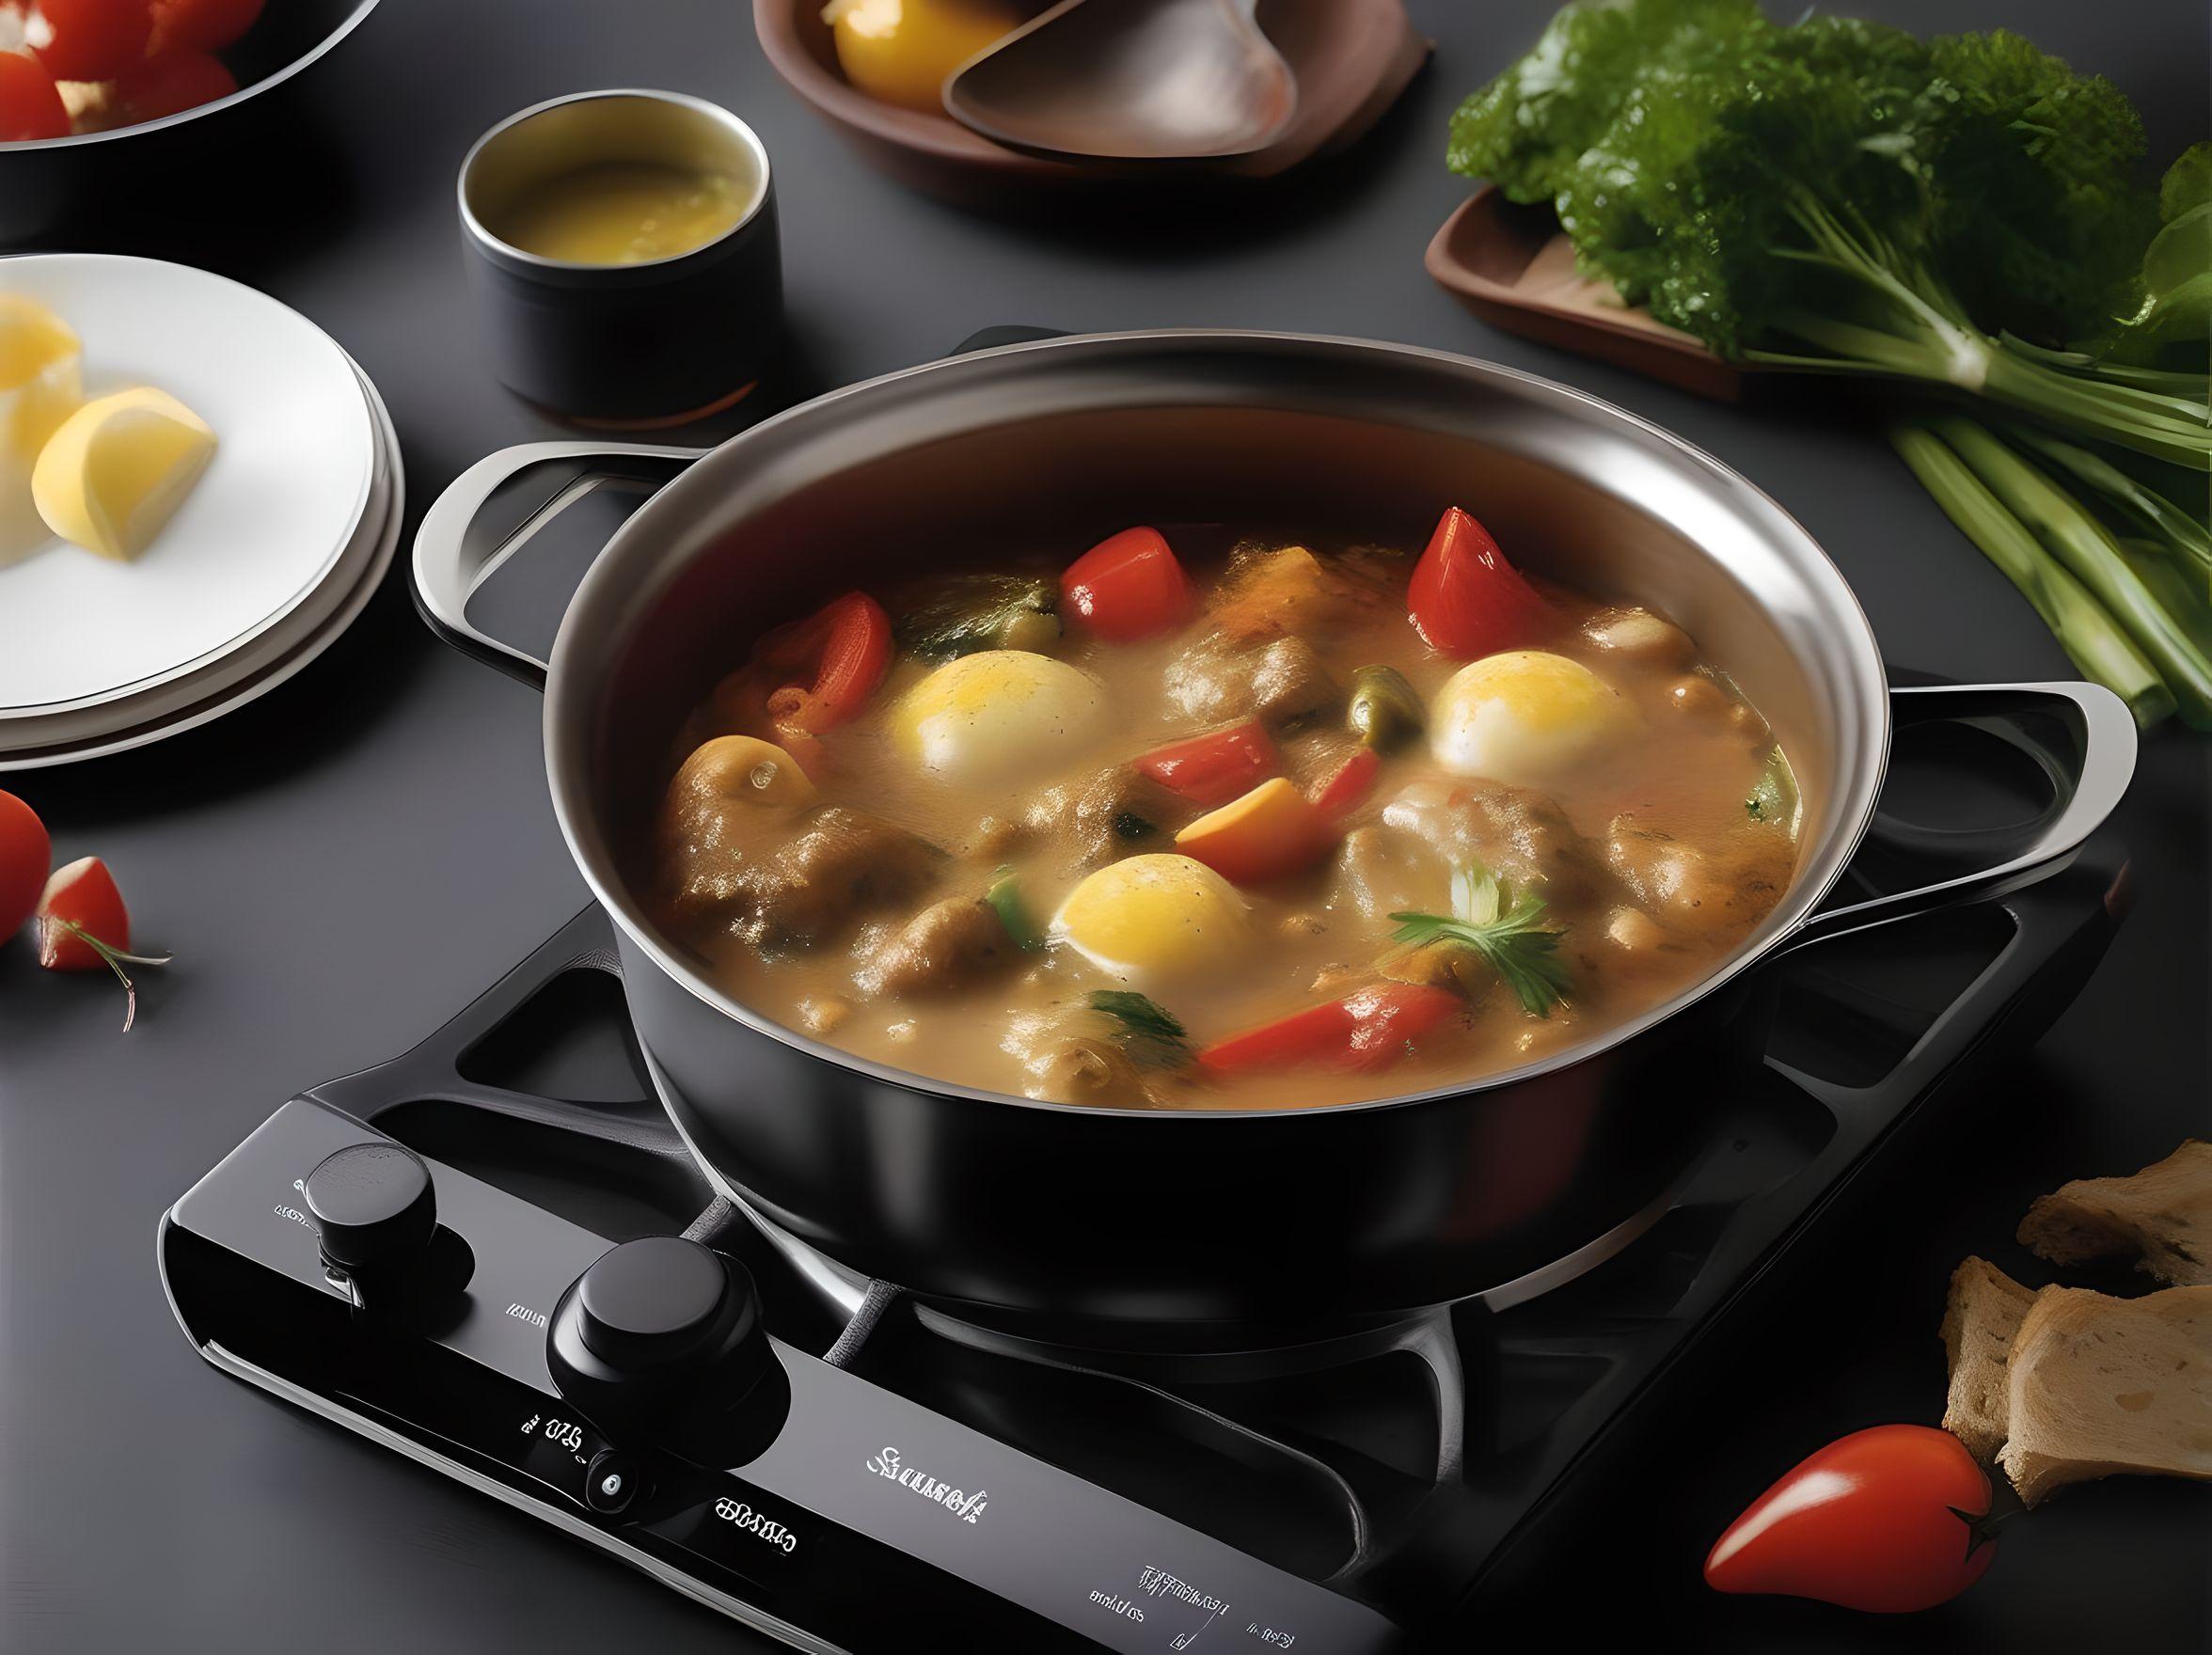 Saucepan 101: Selecting the Perfect Pan for Every Meal